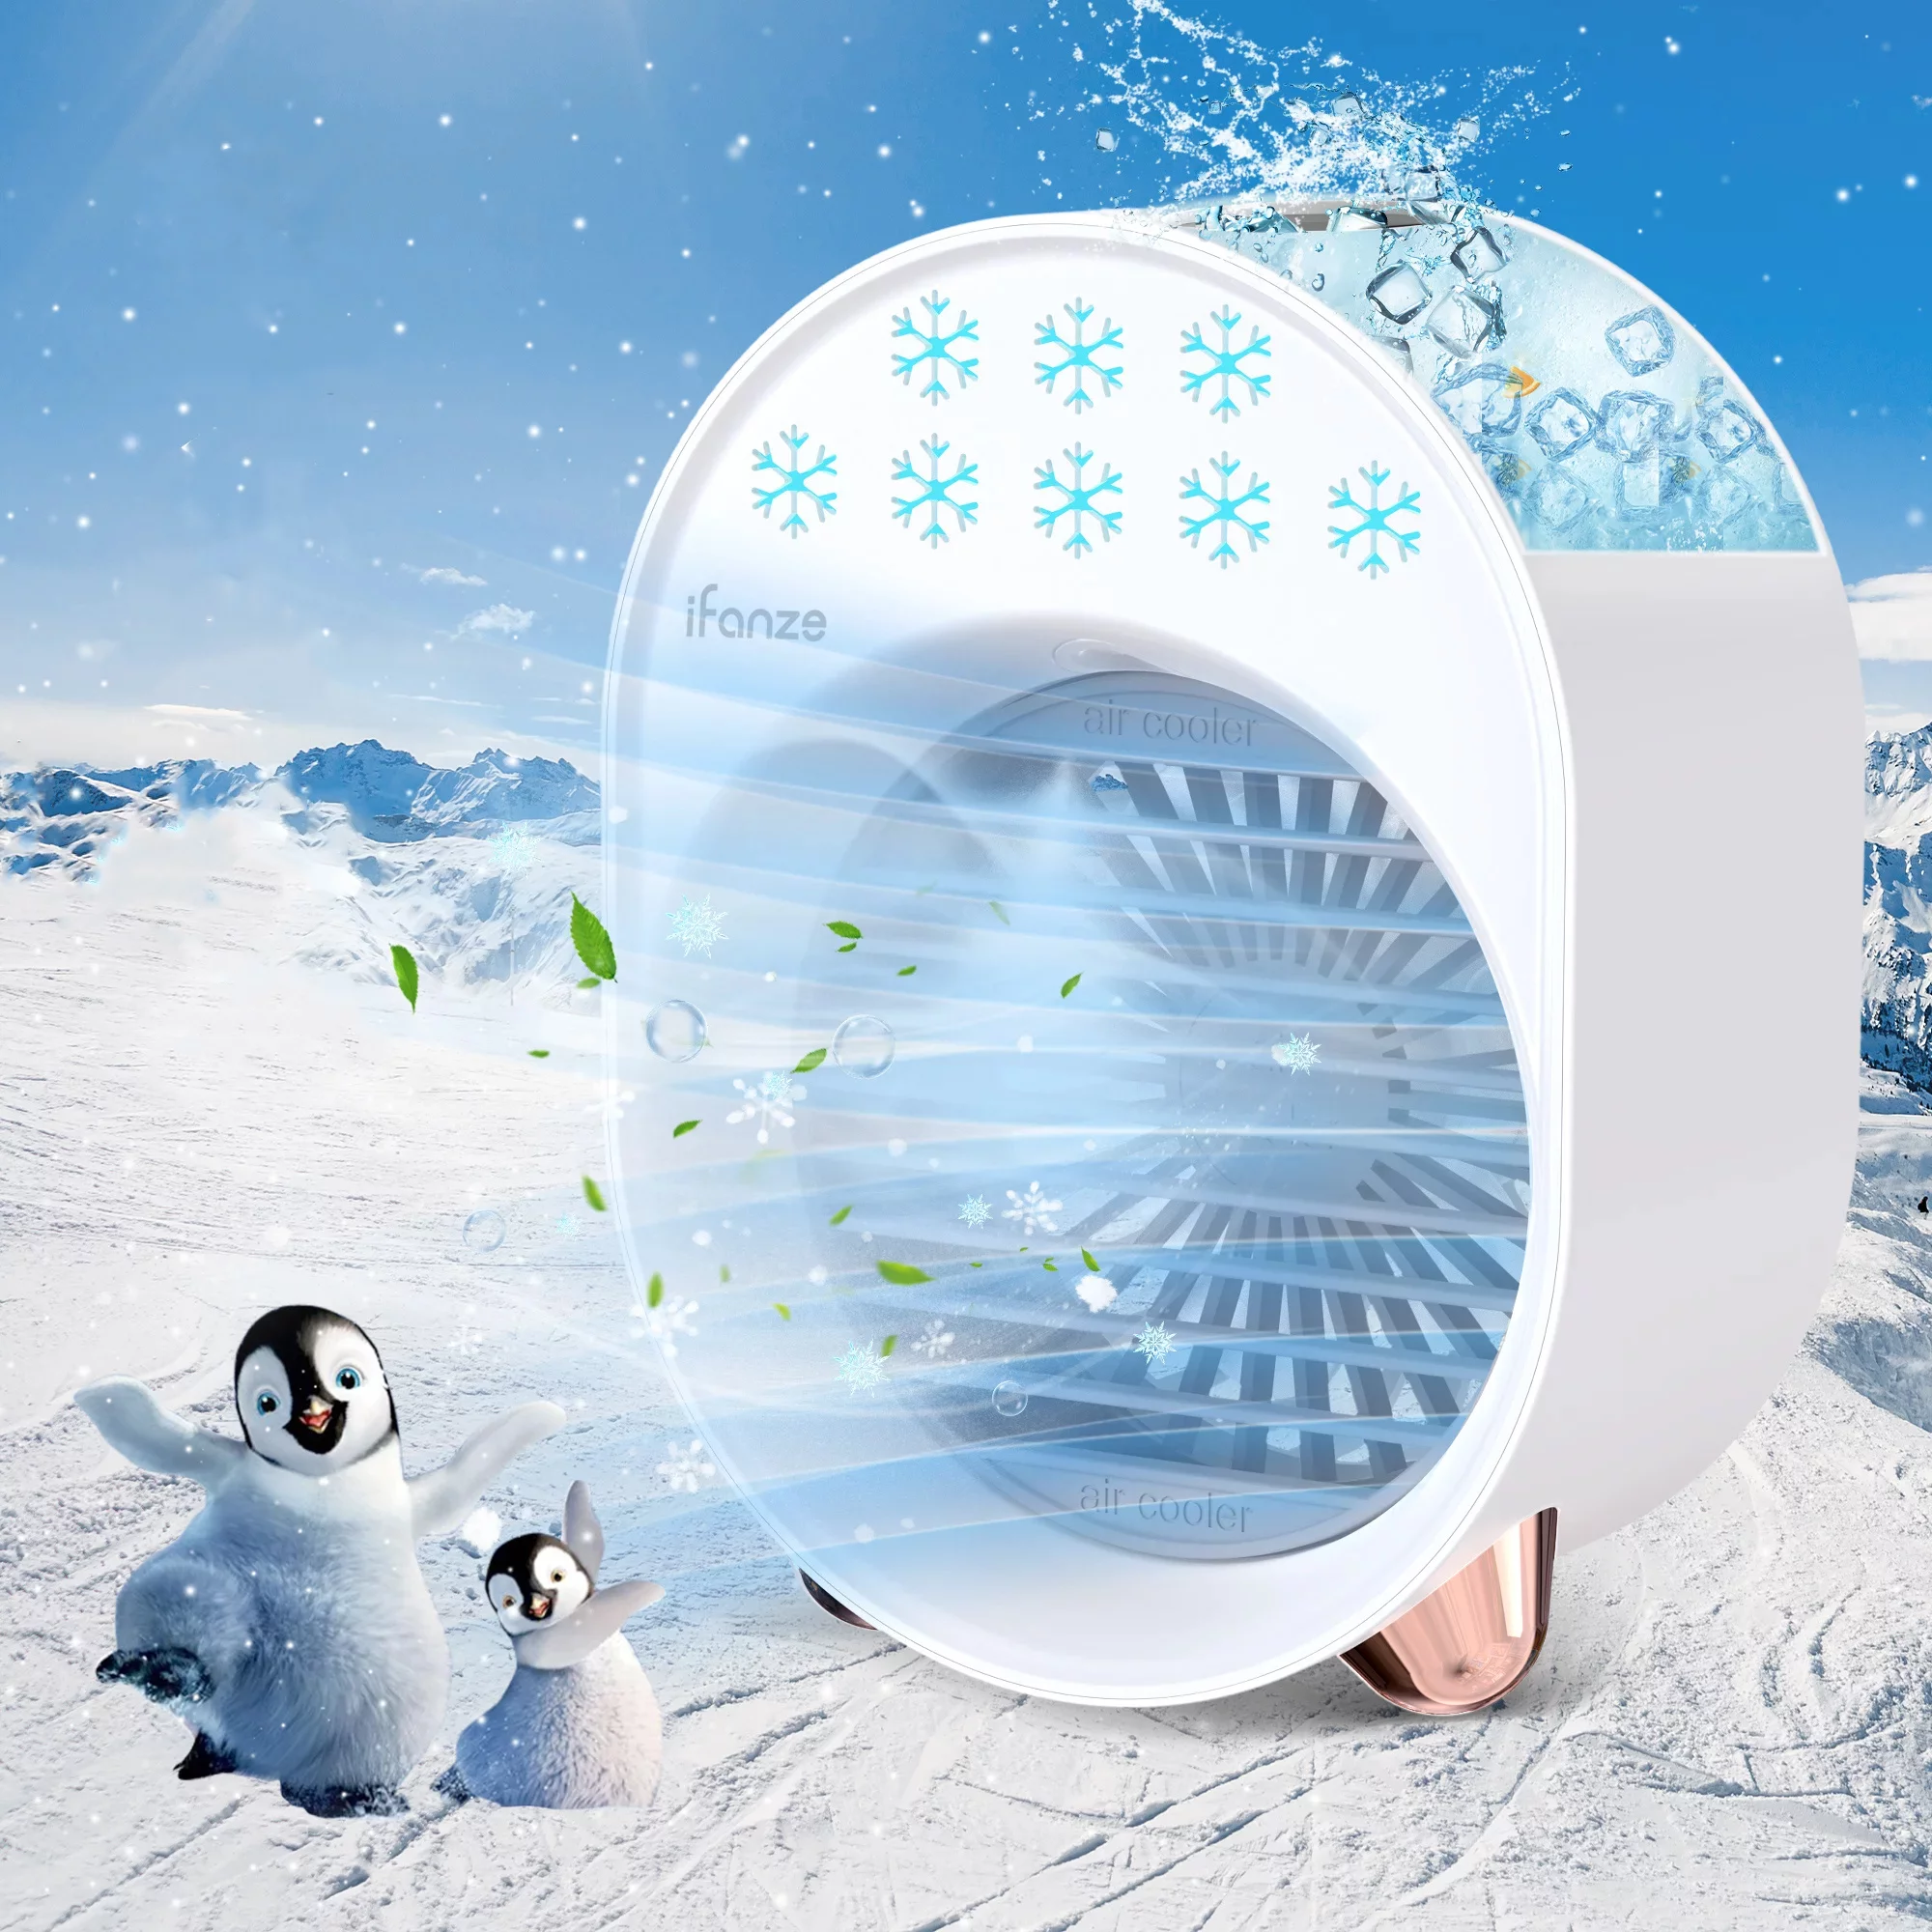 Ifanze Portable Air Conditioners, Rechargeable Personal Mini Air Conditioner Fan with Humidifier, Mini Evaporative Cooler for Room Bedroom Desk - Walmart.com